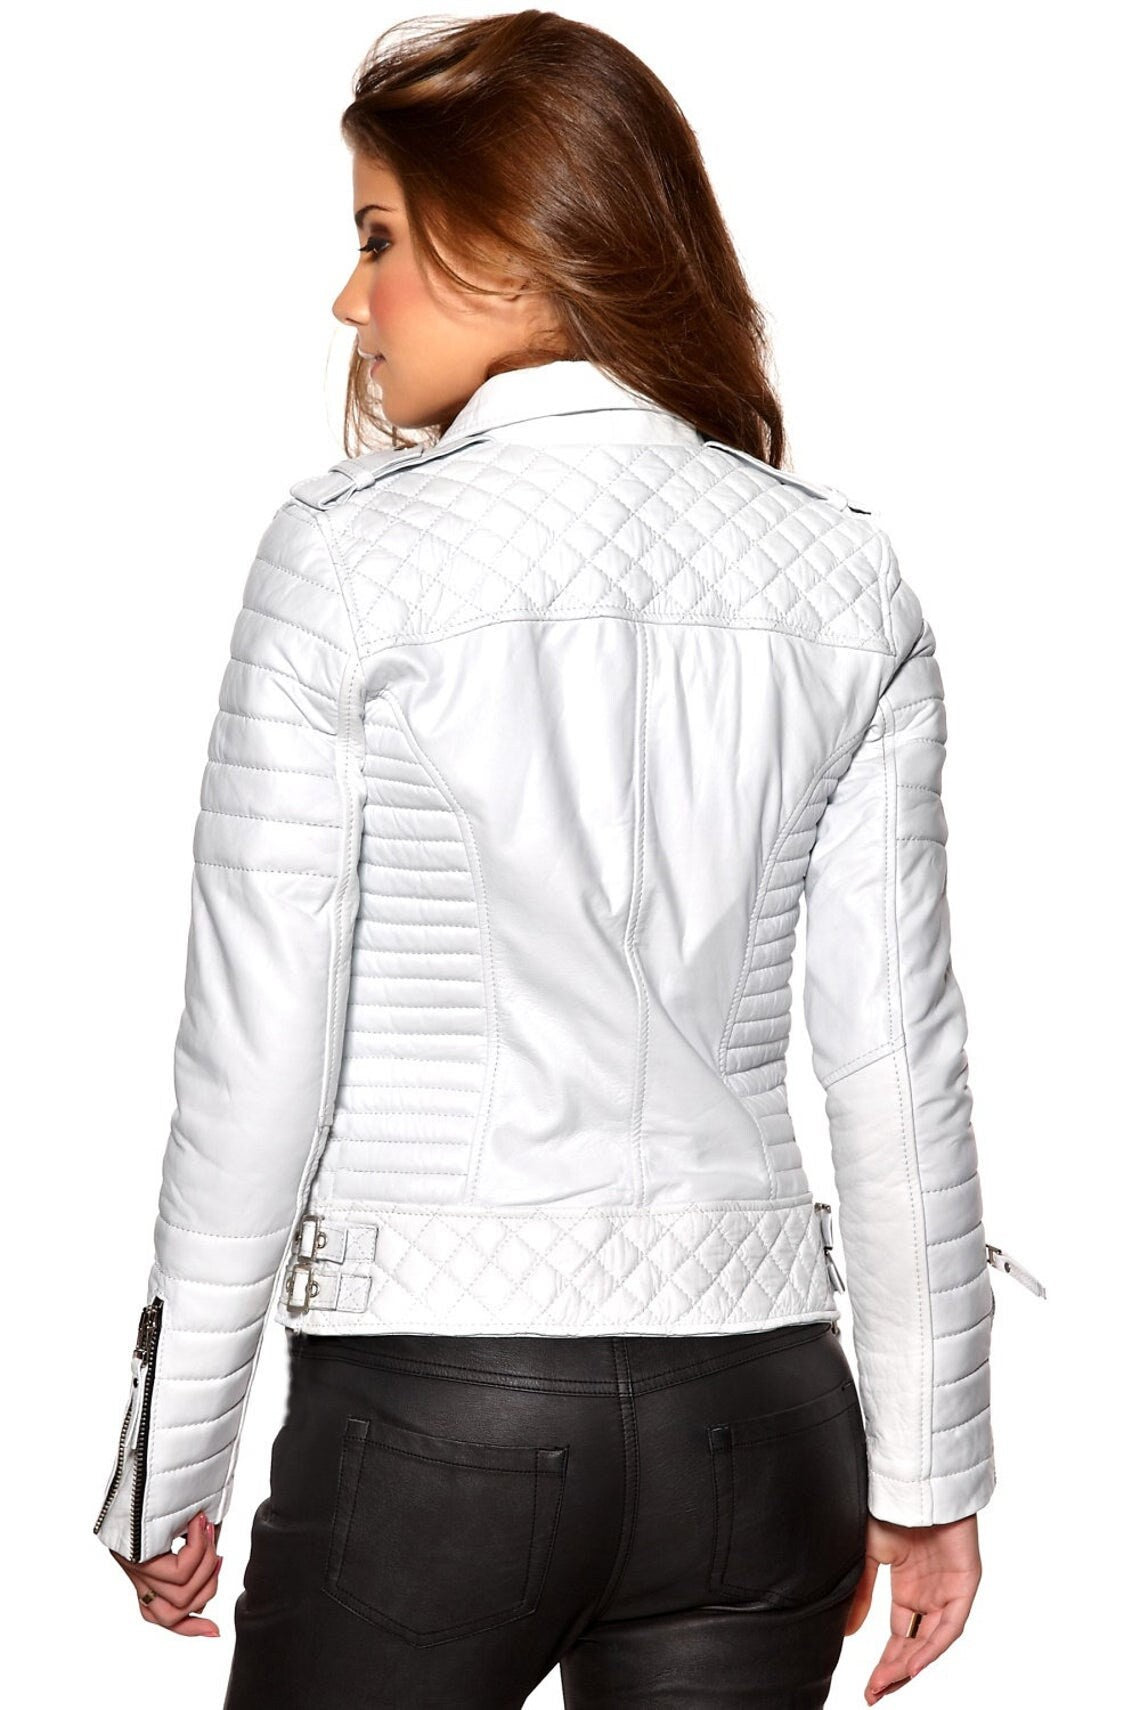 White Leather Bomber Jacket For Women Quilted Leather Jacket White Leather Biker Jacket For Girls Gift for Women